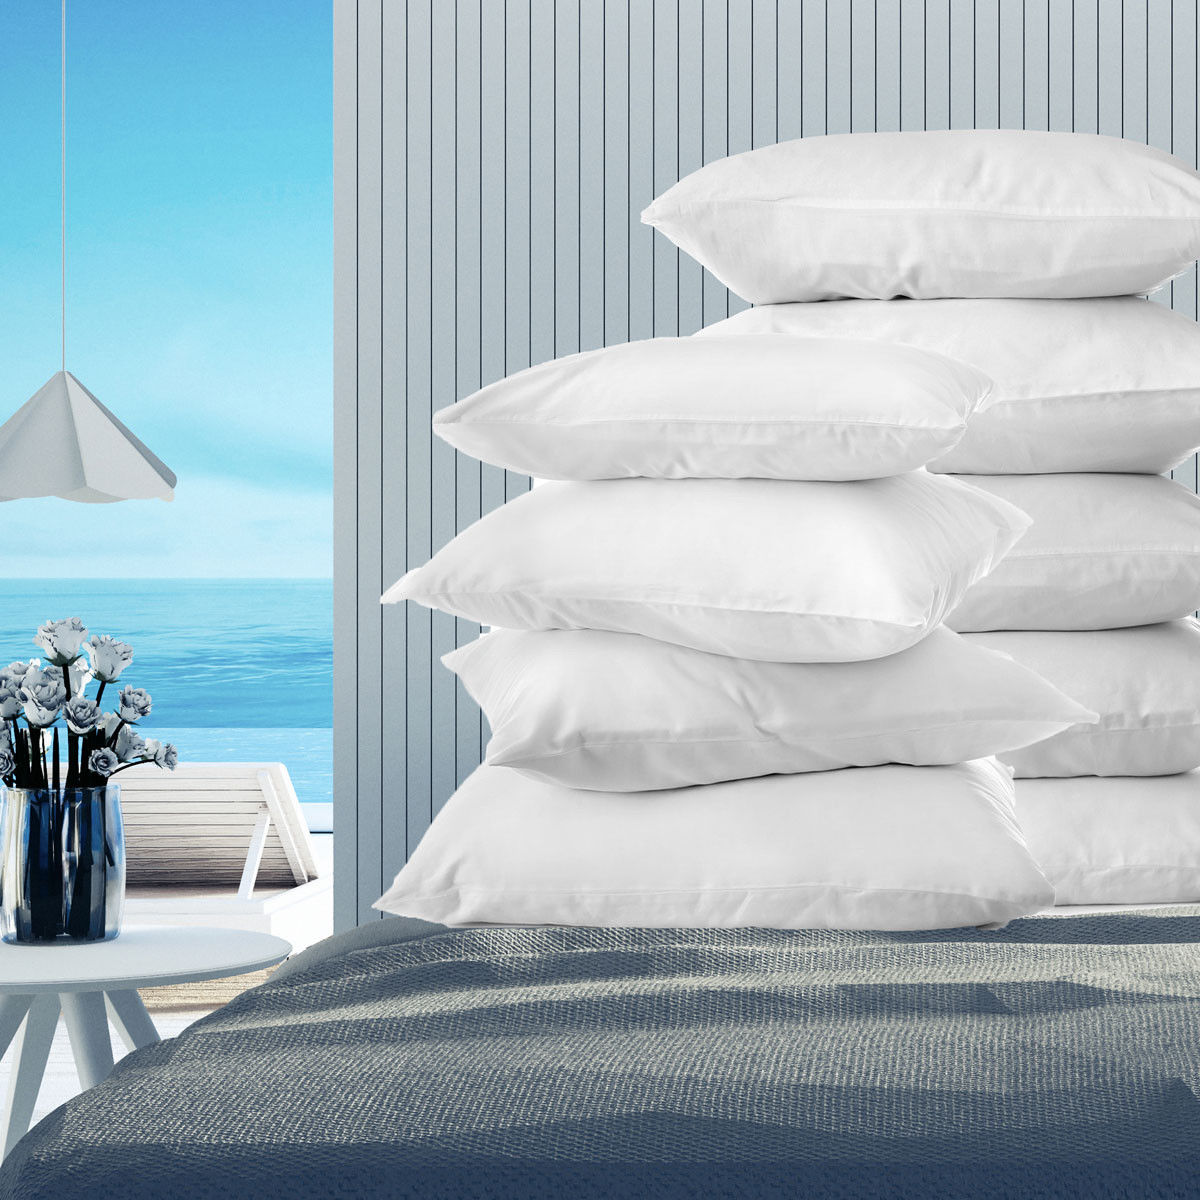 What kind of experience can Oxford Diamond pillows offer for your sleep?